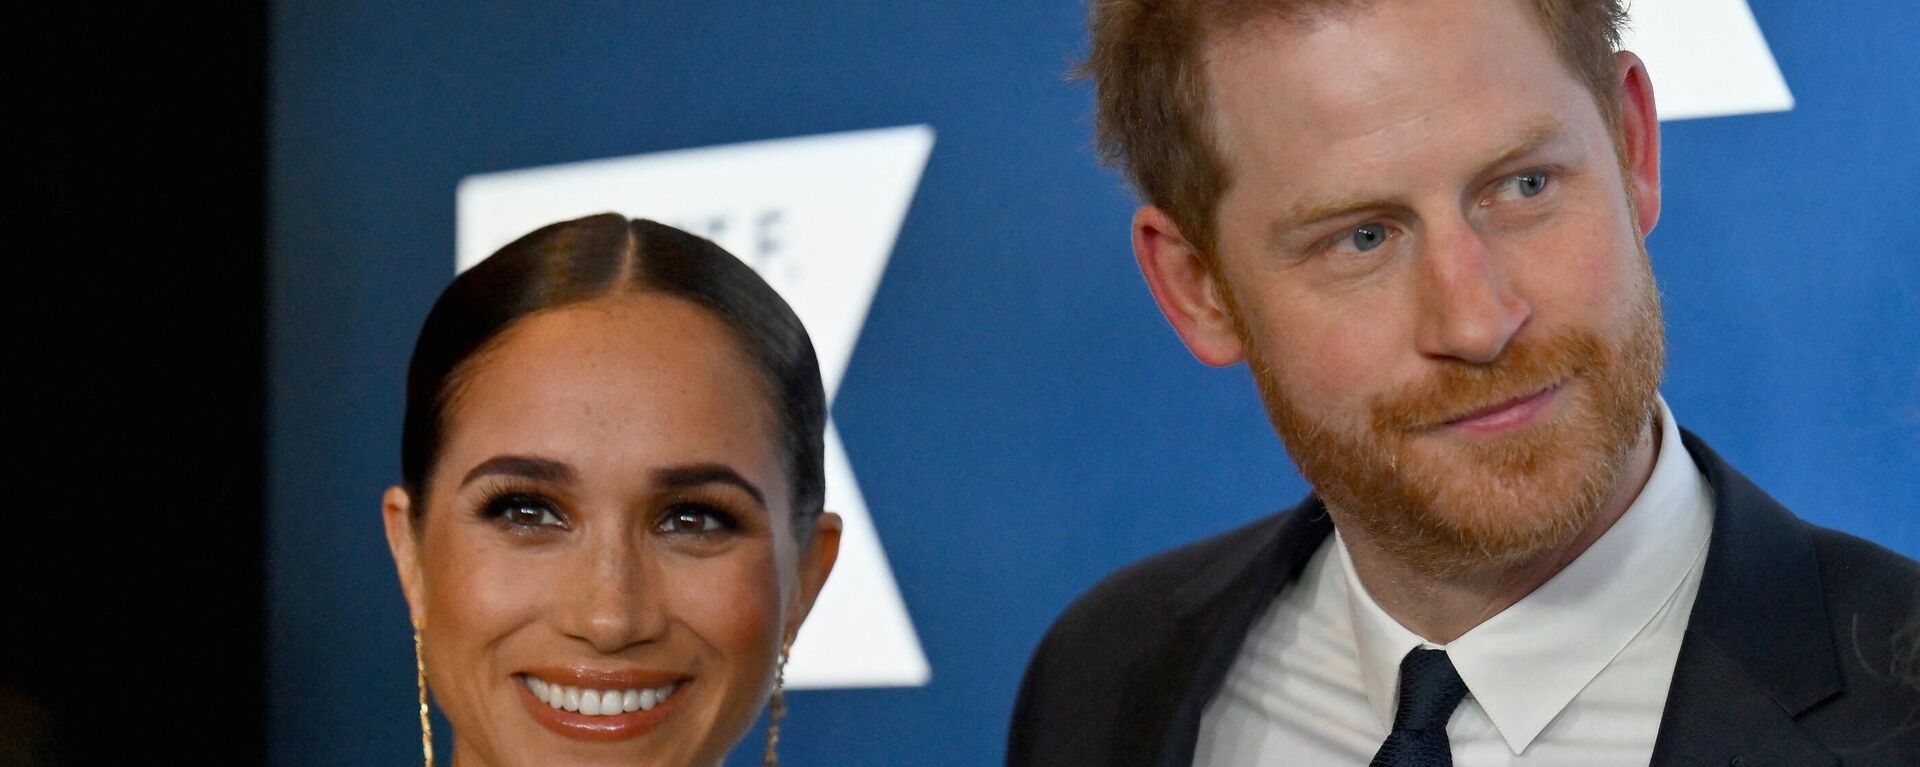 Prince Harry, Duke of Sussex, and Meghan, Duchess of Sussex, arrive at the 2022 Robert F. Kennedy Human Rights Ripple of Hope Award Gala at the Hilton Midtown in New York on December 6, 2022.  - Sputnik International, 1920, 02.03.2023